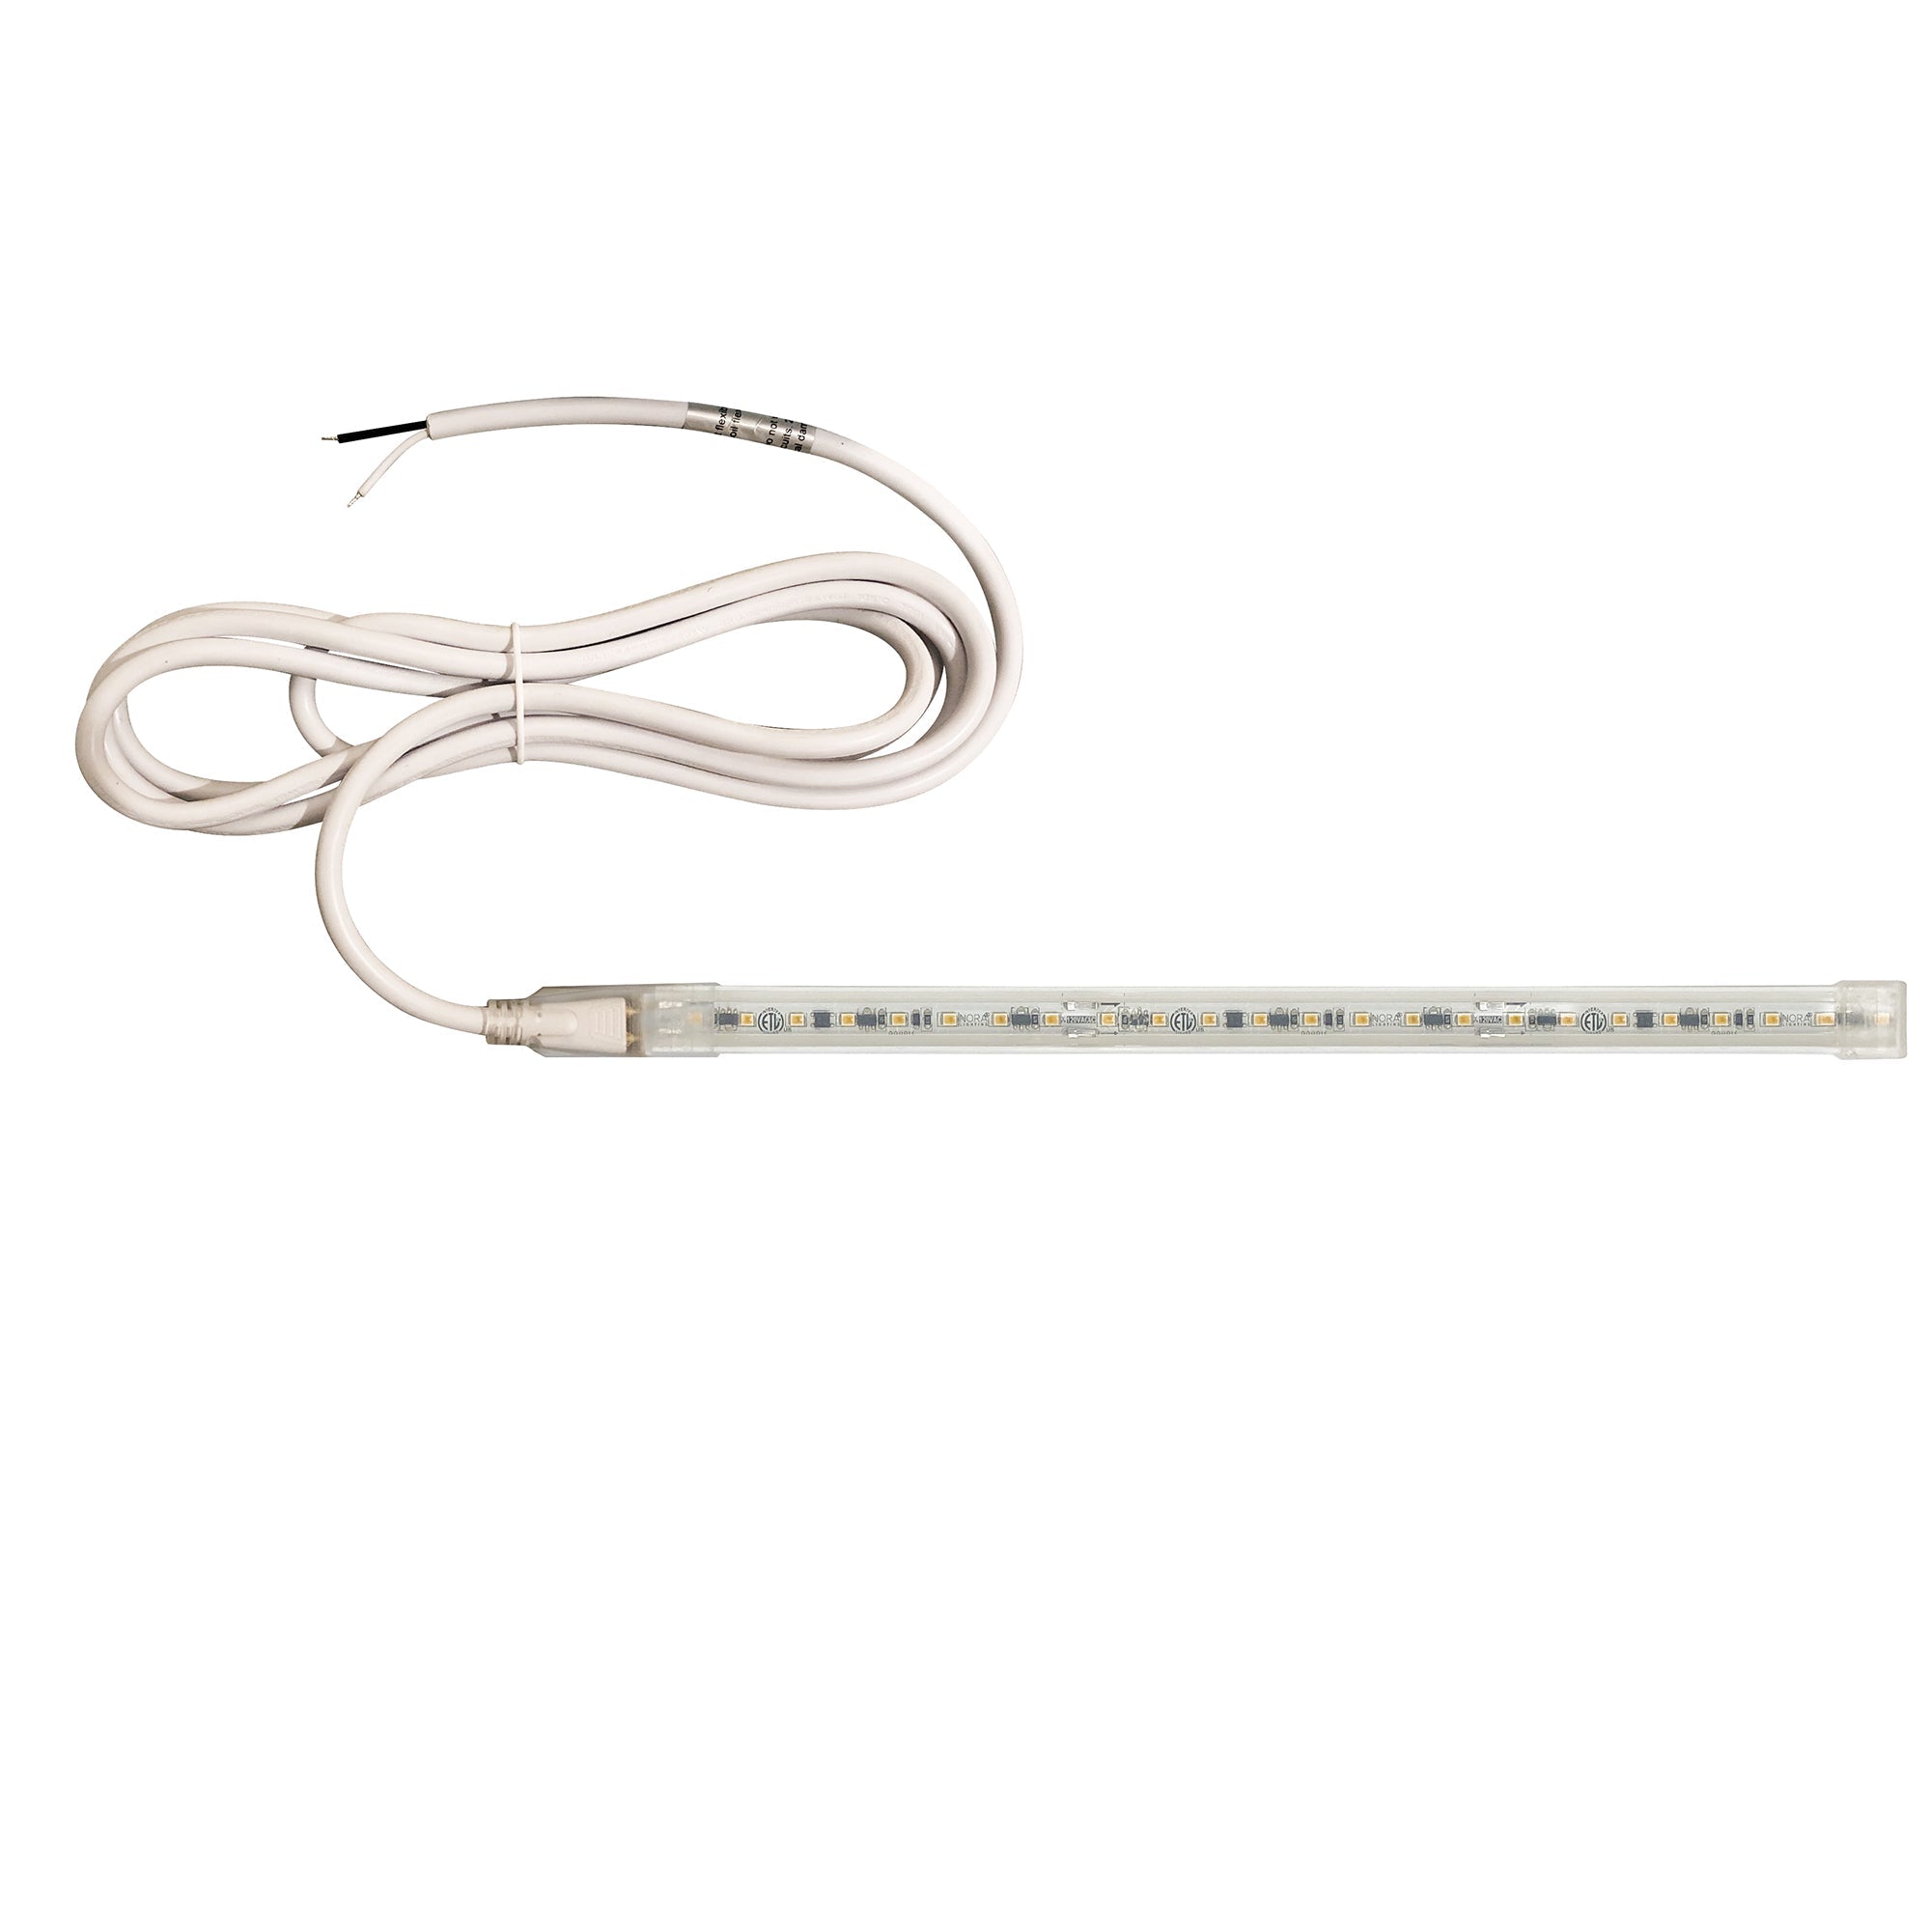 Nora Lighting NUTP13-W7-12-927/HW - Accent / Undercabinet - Custom Cut 7-ft 120V Continuous LED Tape Light, 330lm / 3.6W per foot, 2700K, w/ Mounting Clips and 8' Hardwired Power Cord